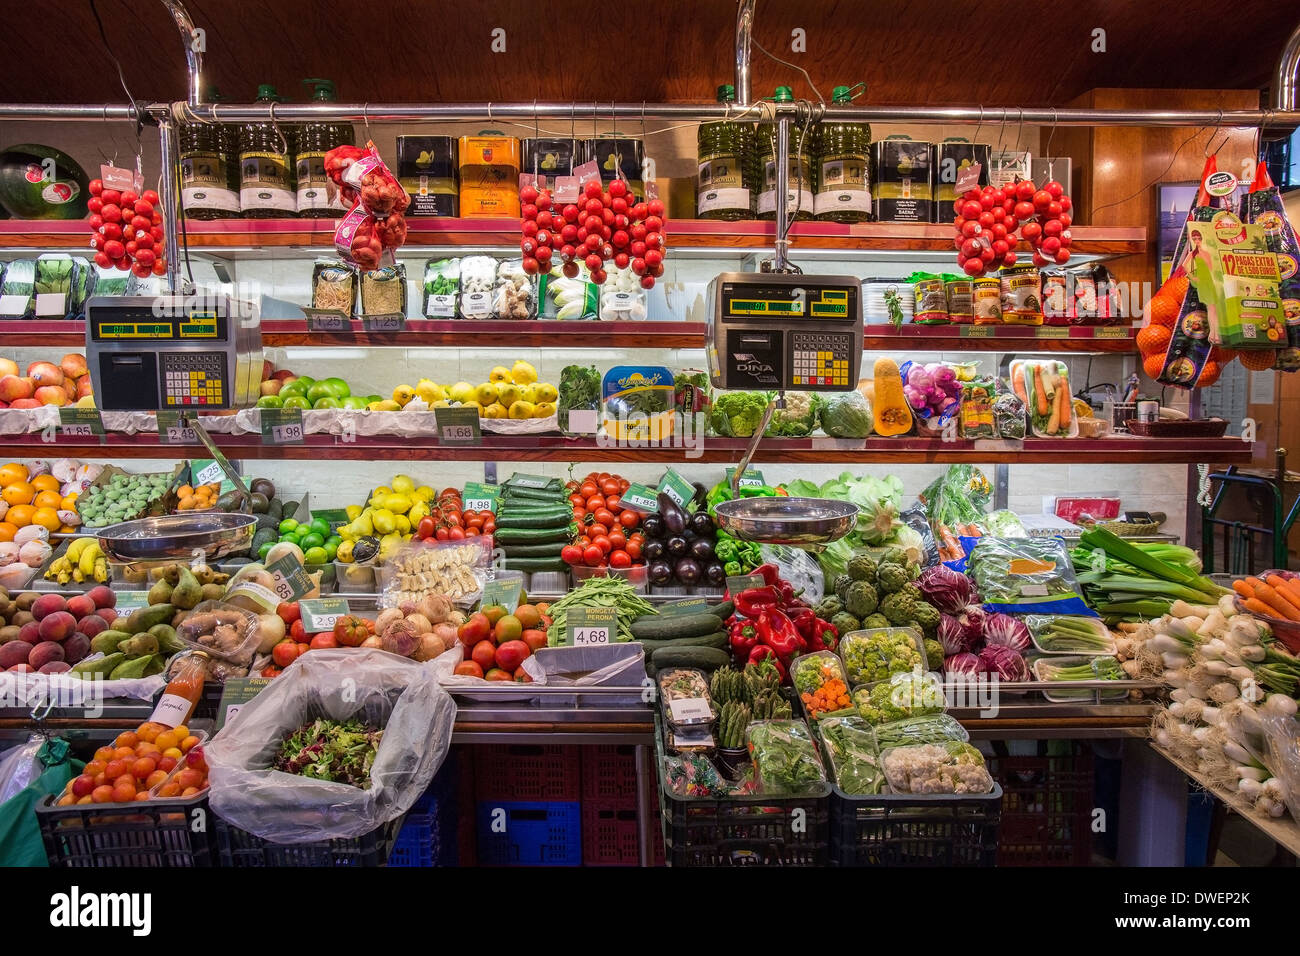 Vintage Grocery Store Interior Produce Fruits Vegetables Shoppers